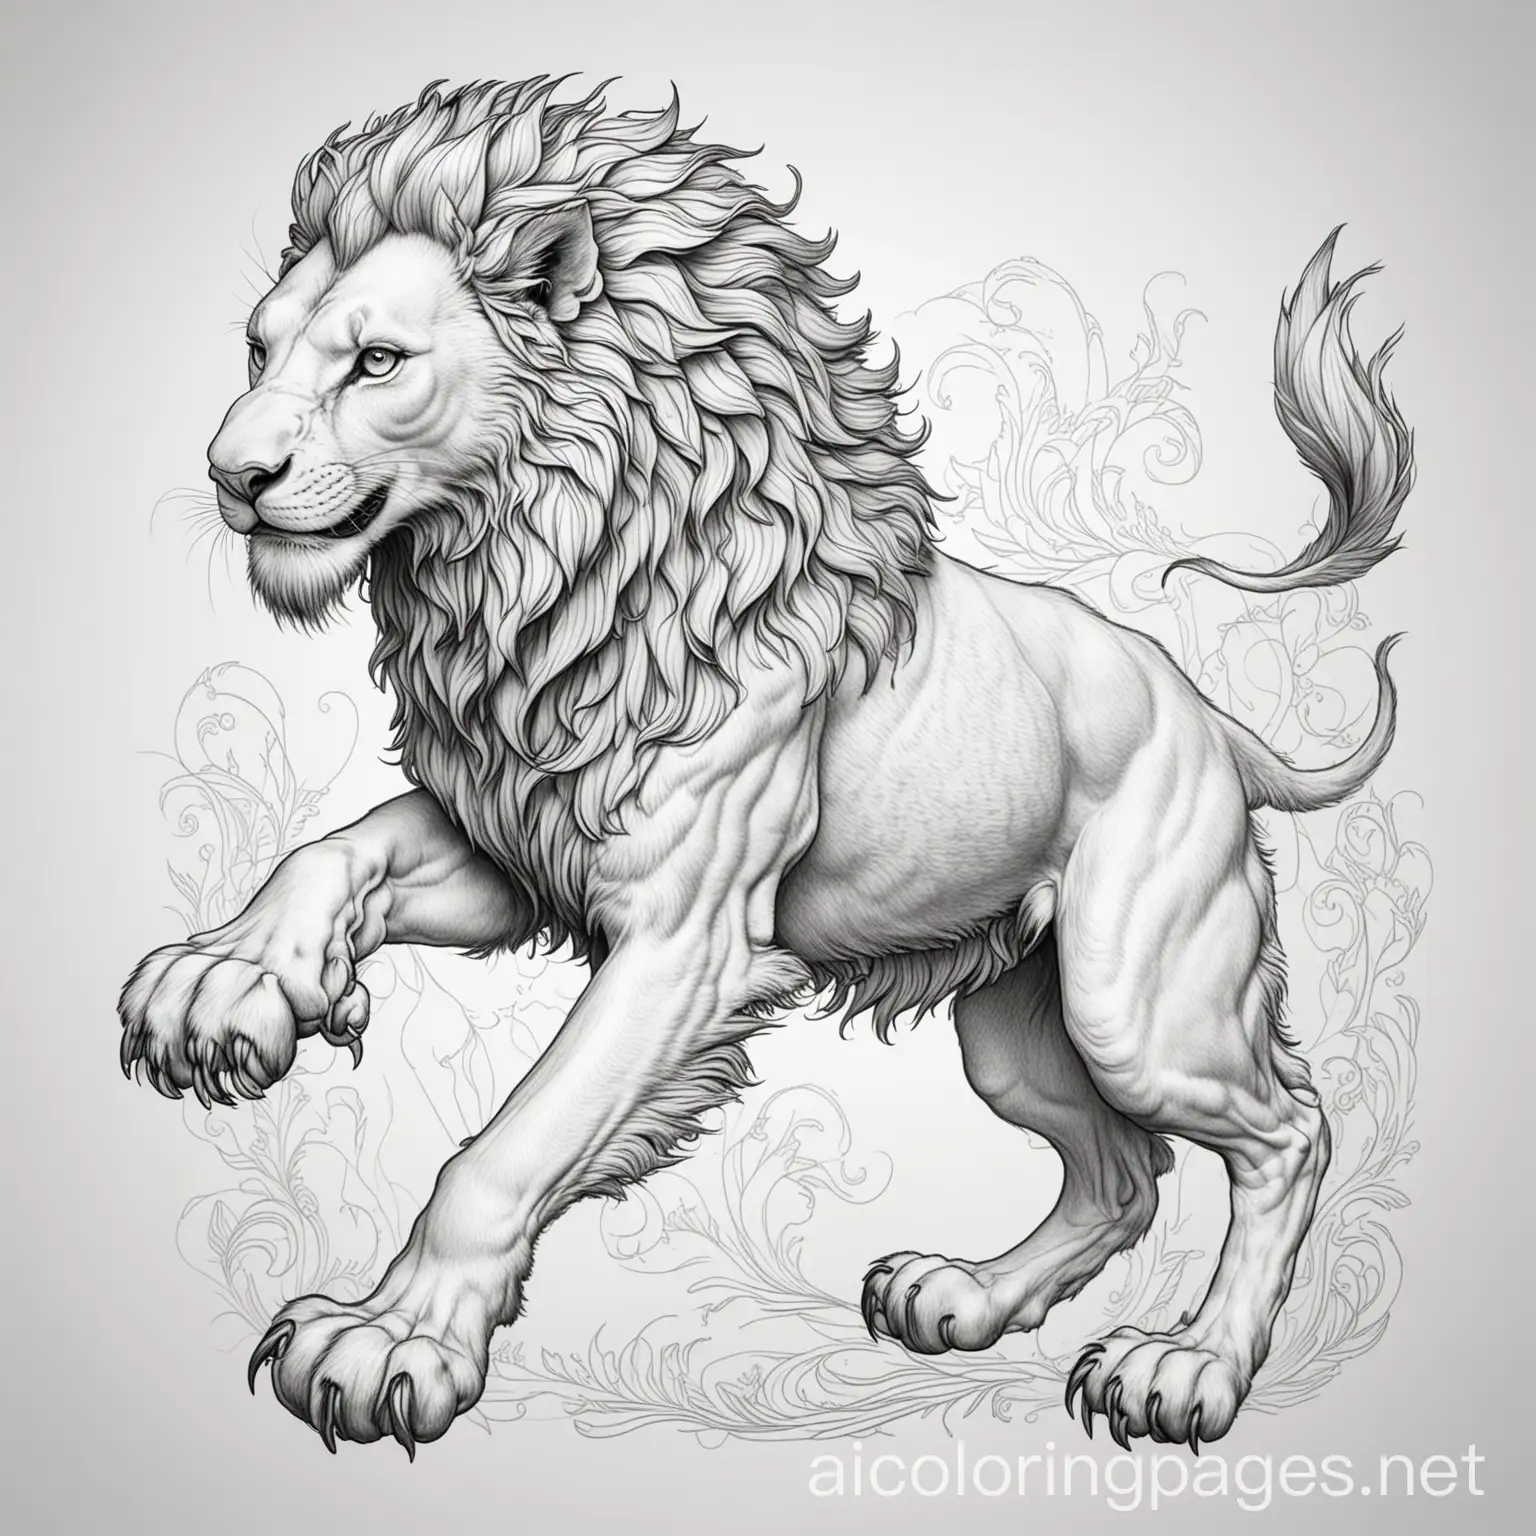 Playful griffin with a lion's body, Coloring Page, black and white, line art, white background, Simplicity, Ample White Space.